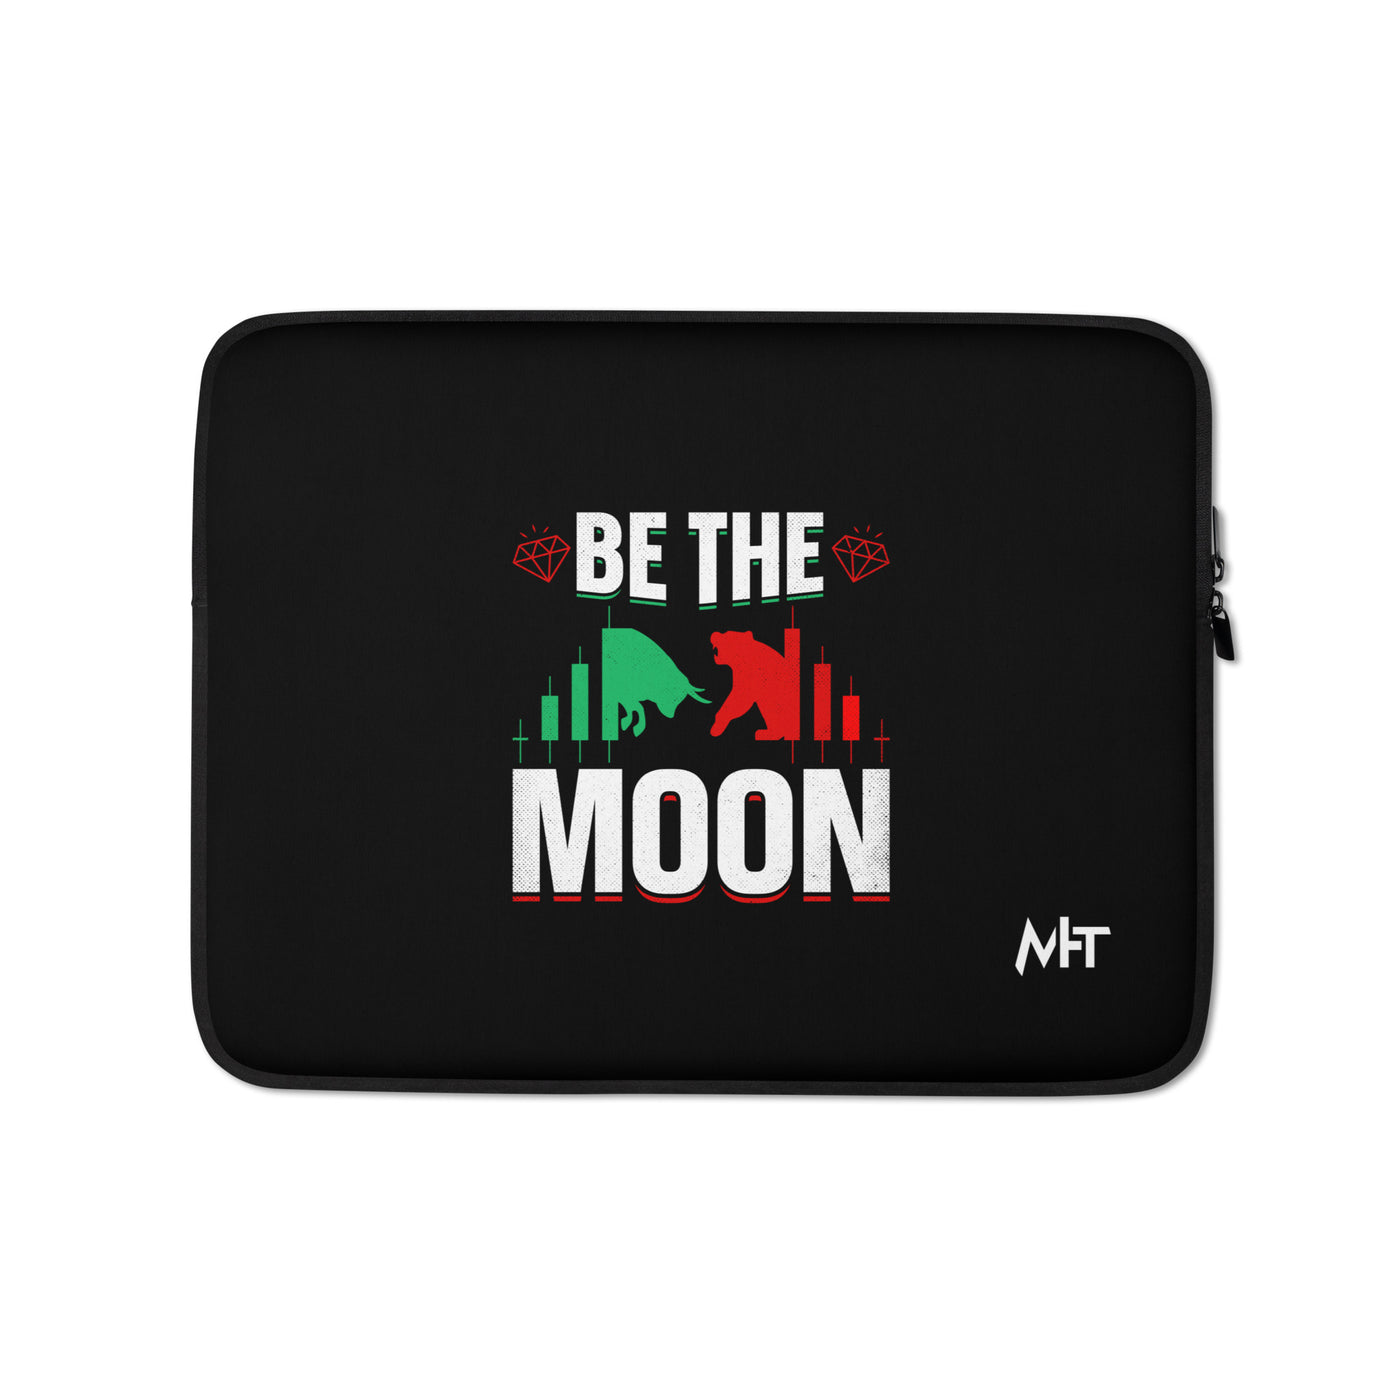 Be the Moon - Laptop Sleeve